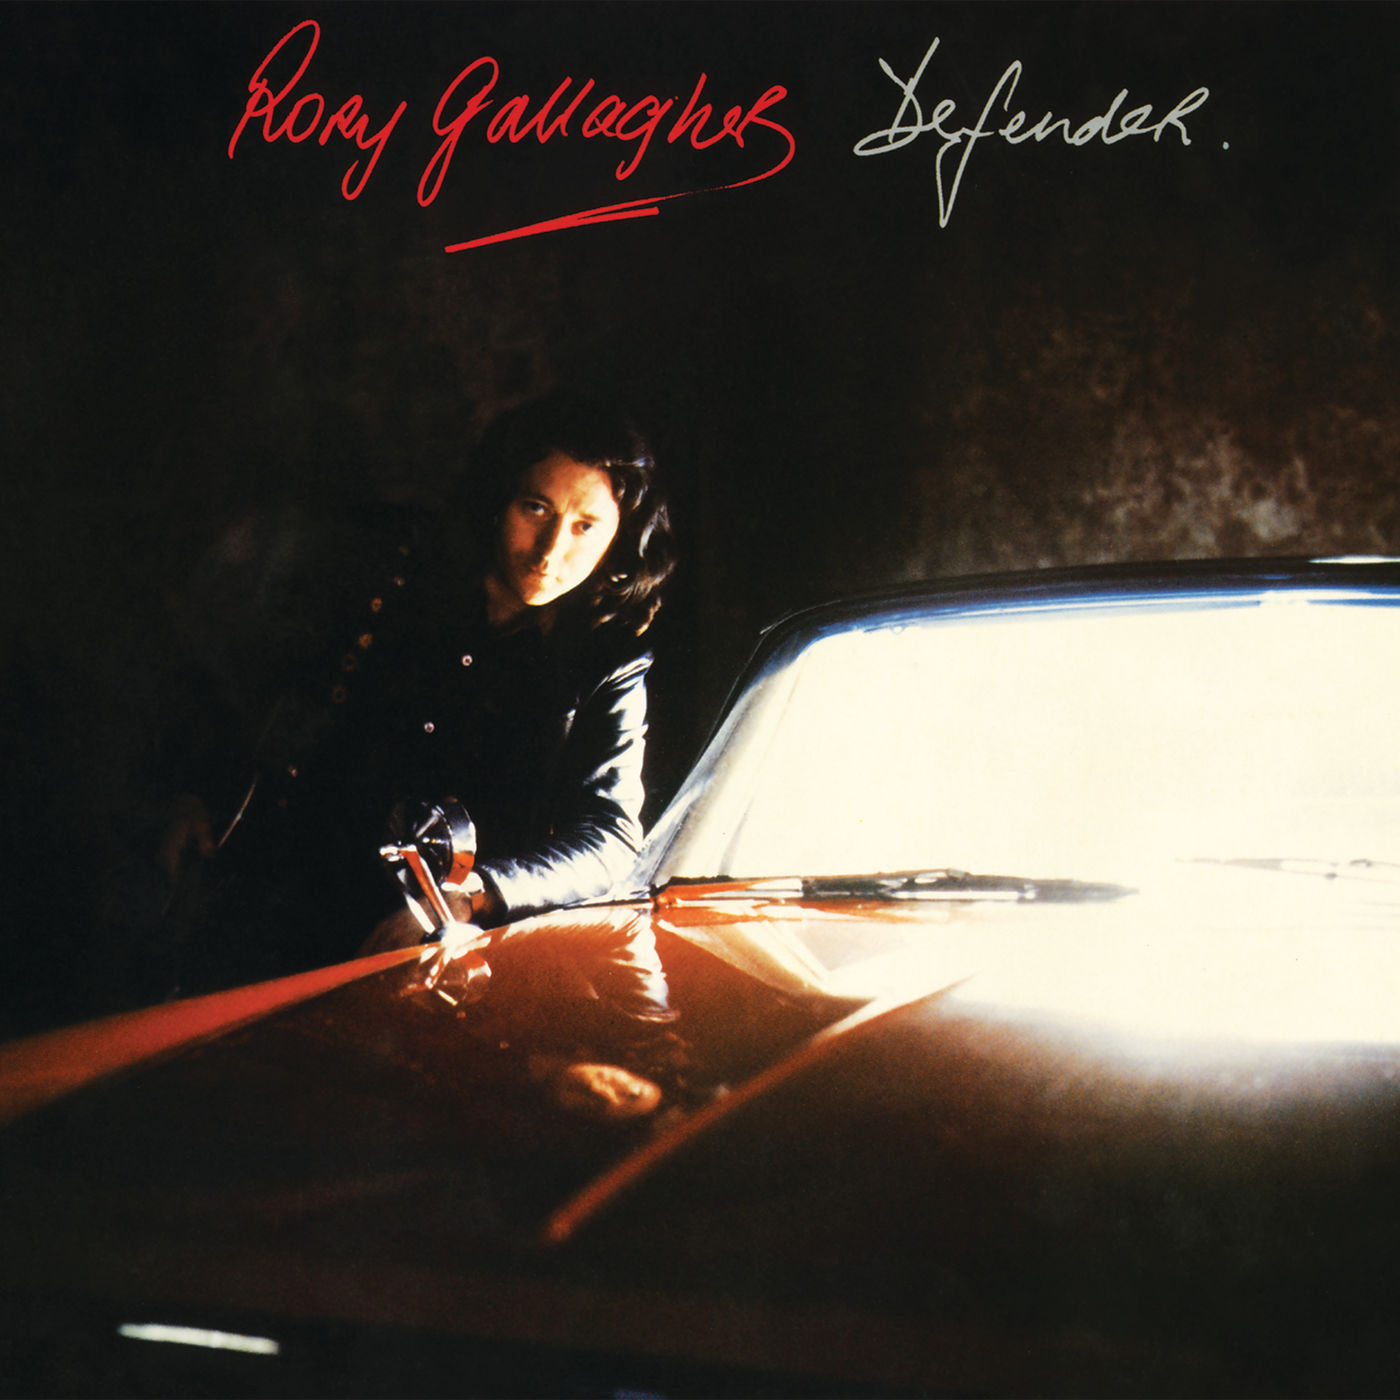 Rory Gallagher - 1987 - Defender [2020 HDtracks]